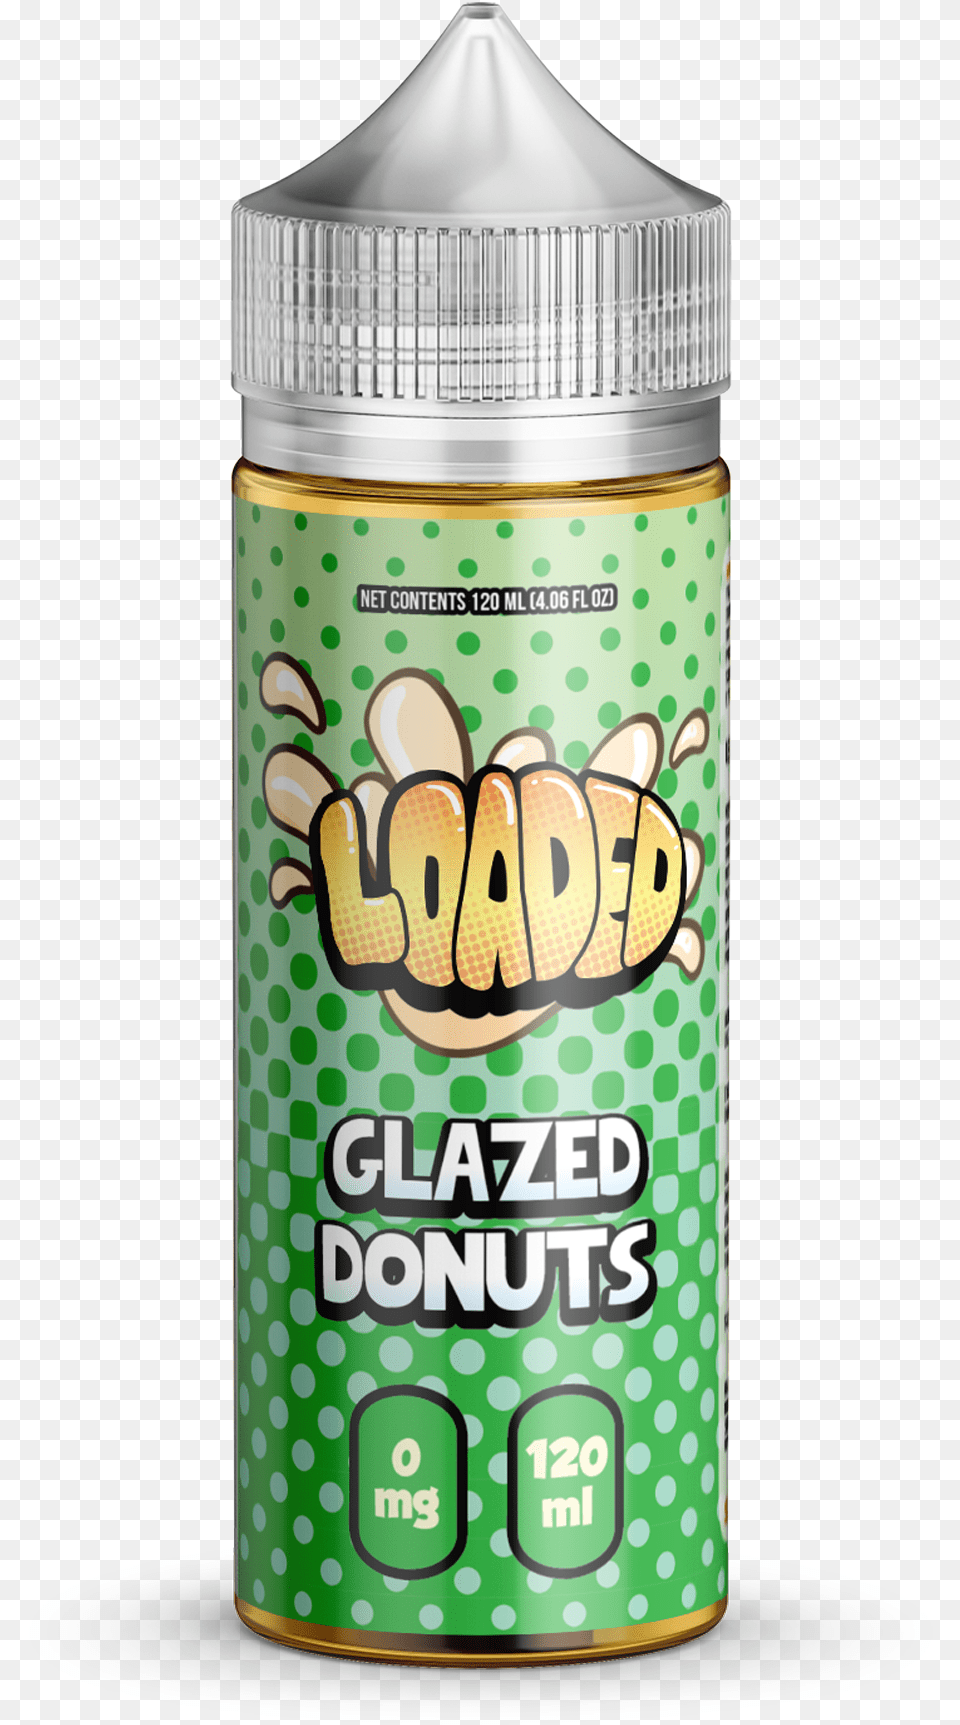 Loaded 120ml Loaded Glazed Donuts, Can, Tin Free Png